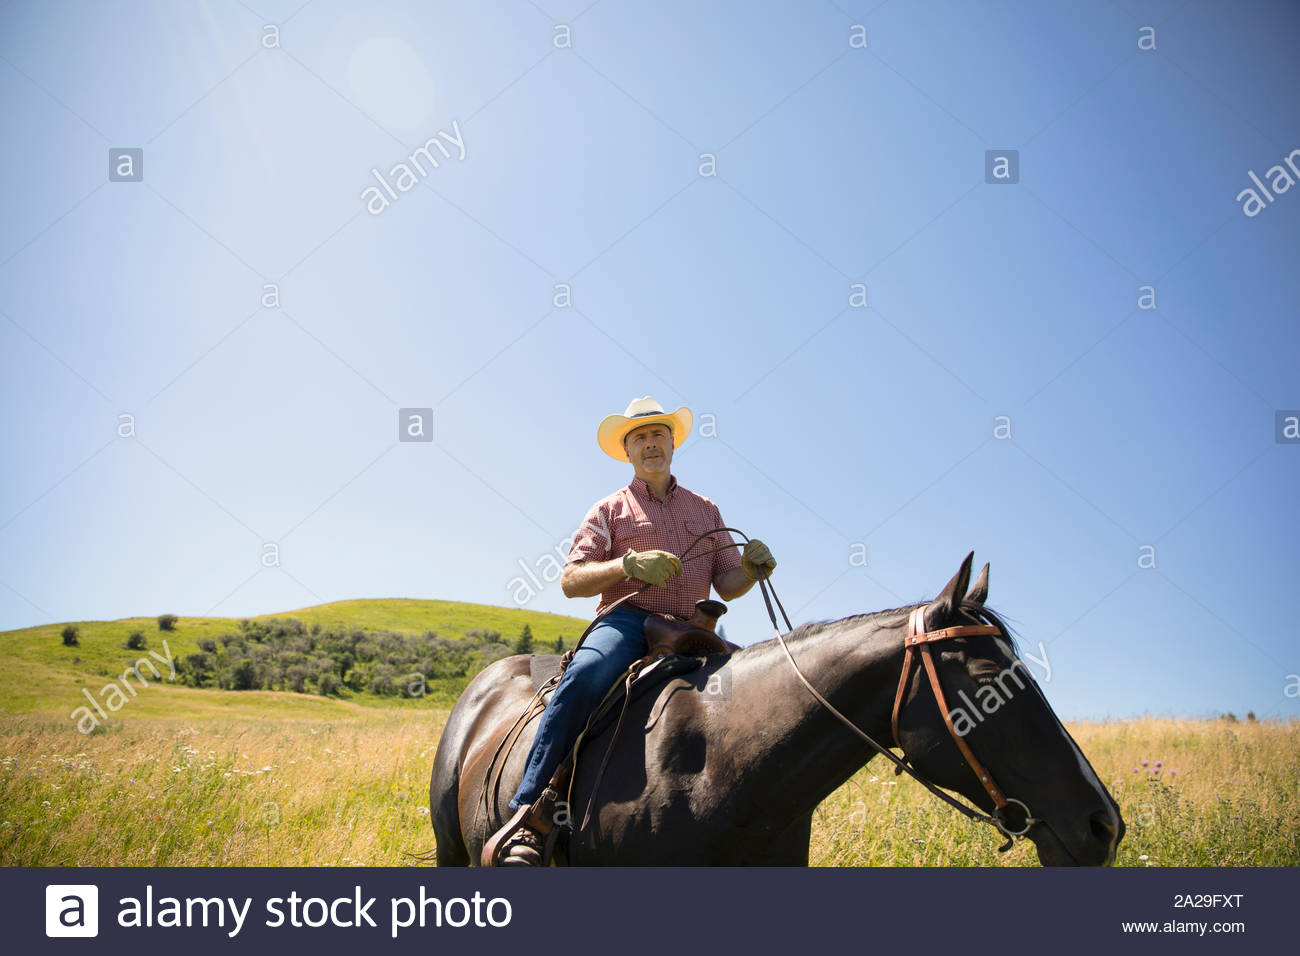 Rancher riding horse in field Stock Photo - Alamy